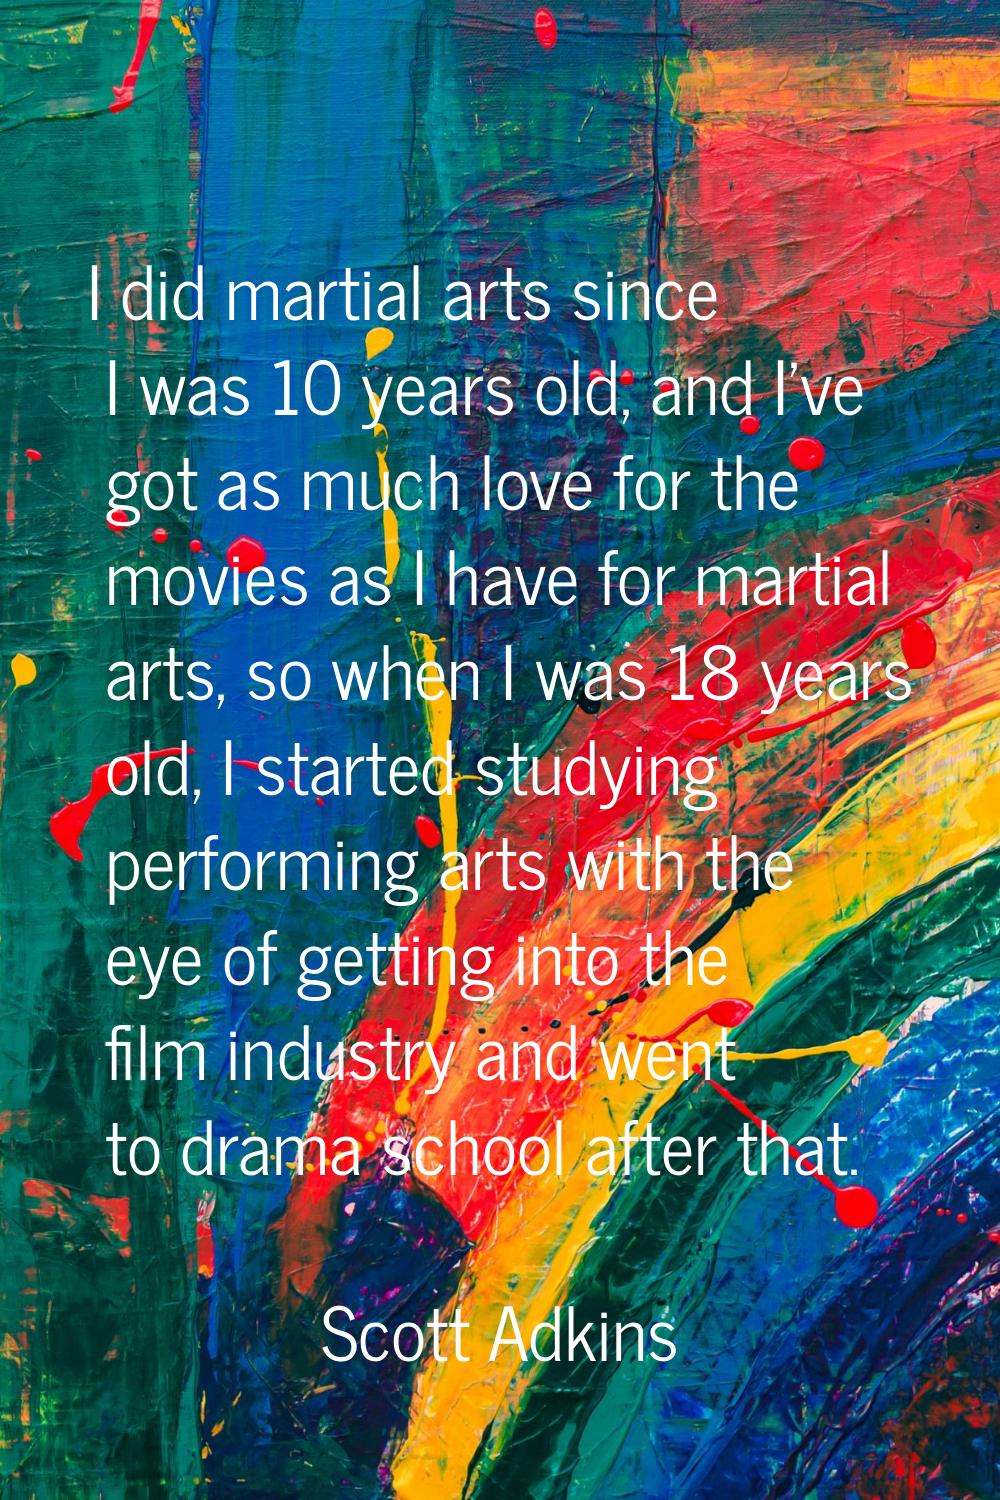 I did martial arts since I was 10 years old, and I've got as much love for the movies as I have for